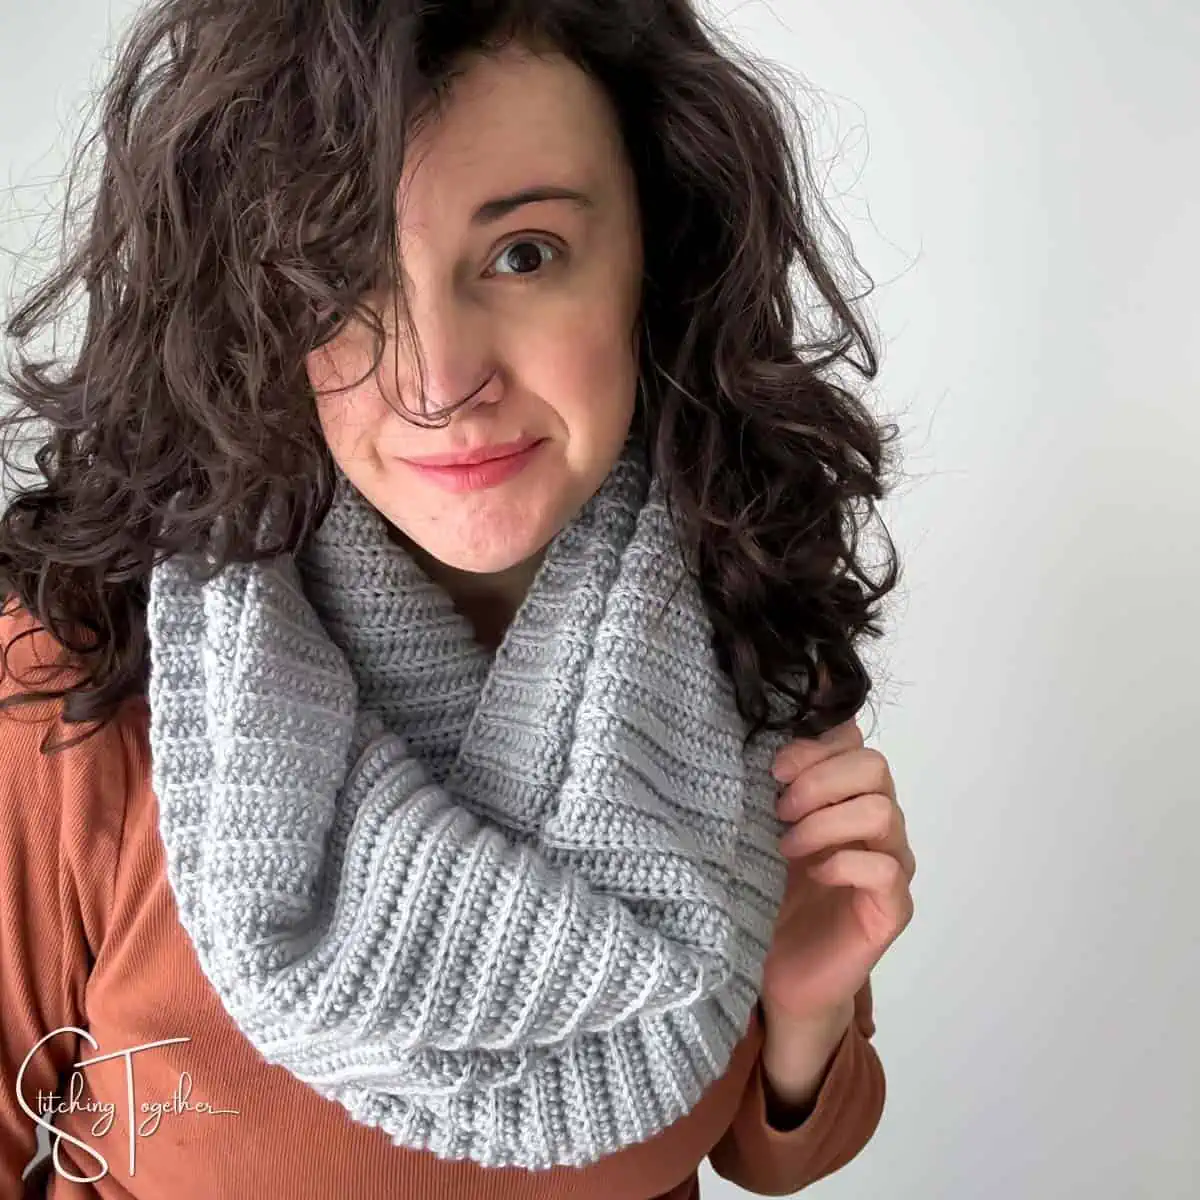 woman wearing an orange shirt and a gray crochet ribbed infinity scarf